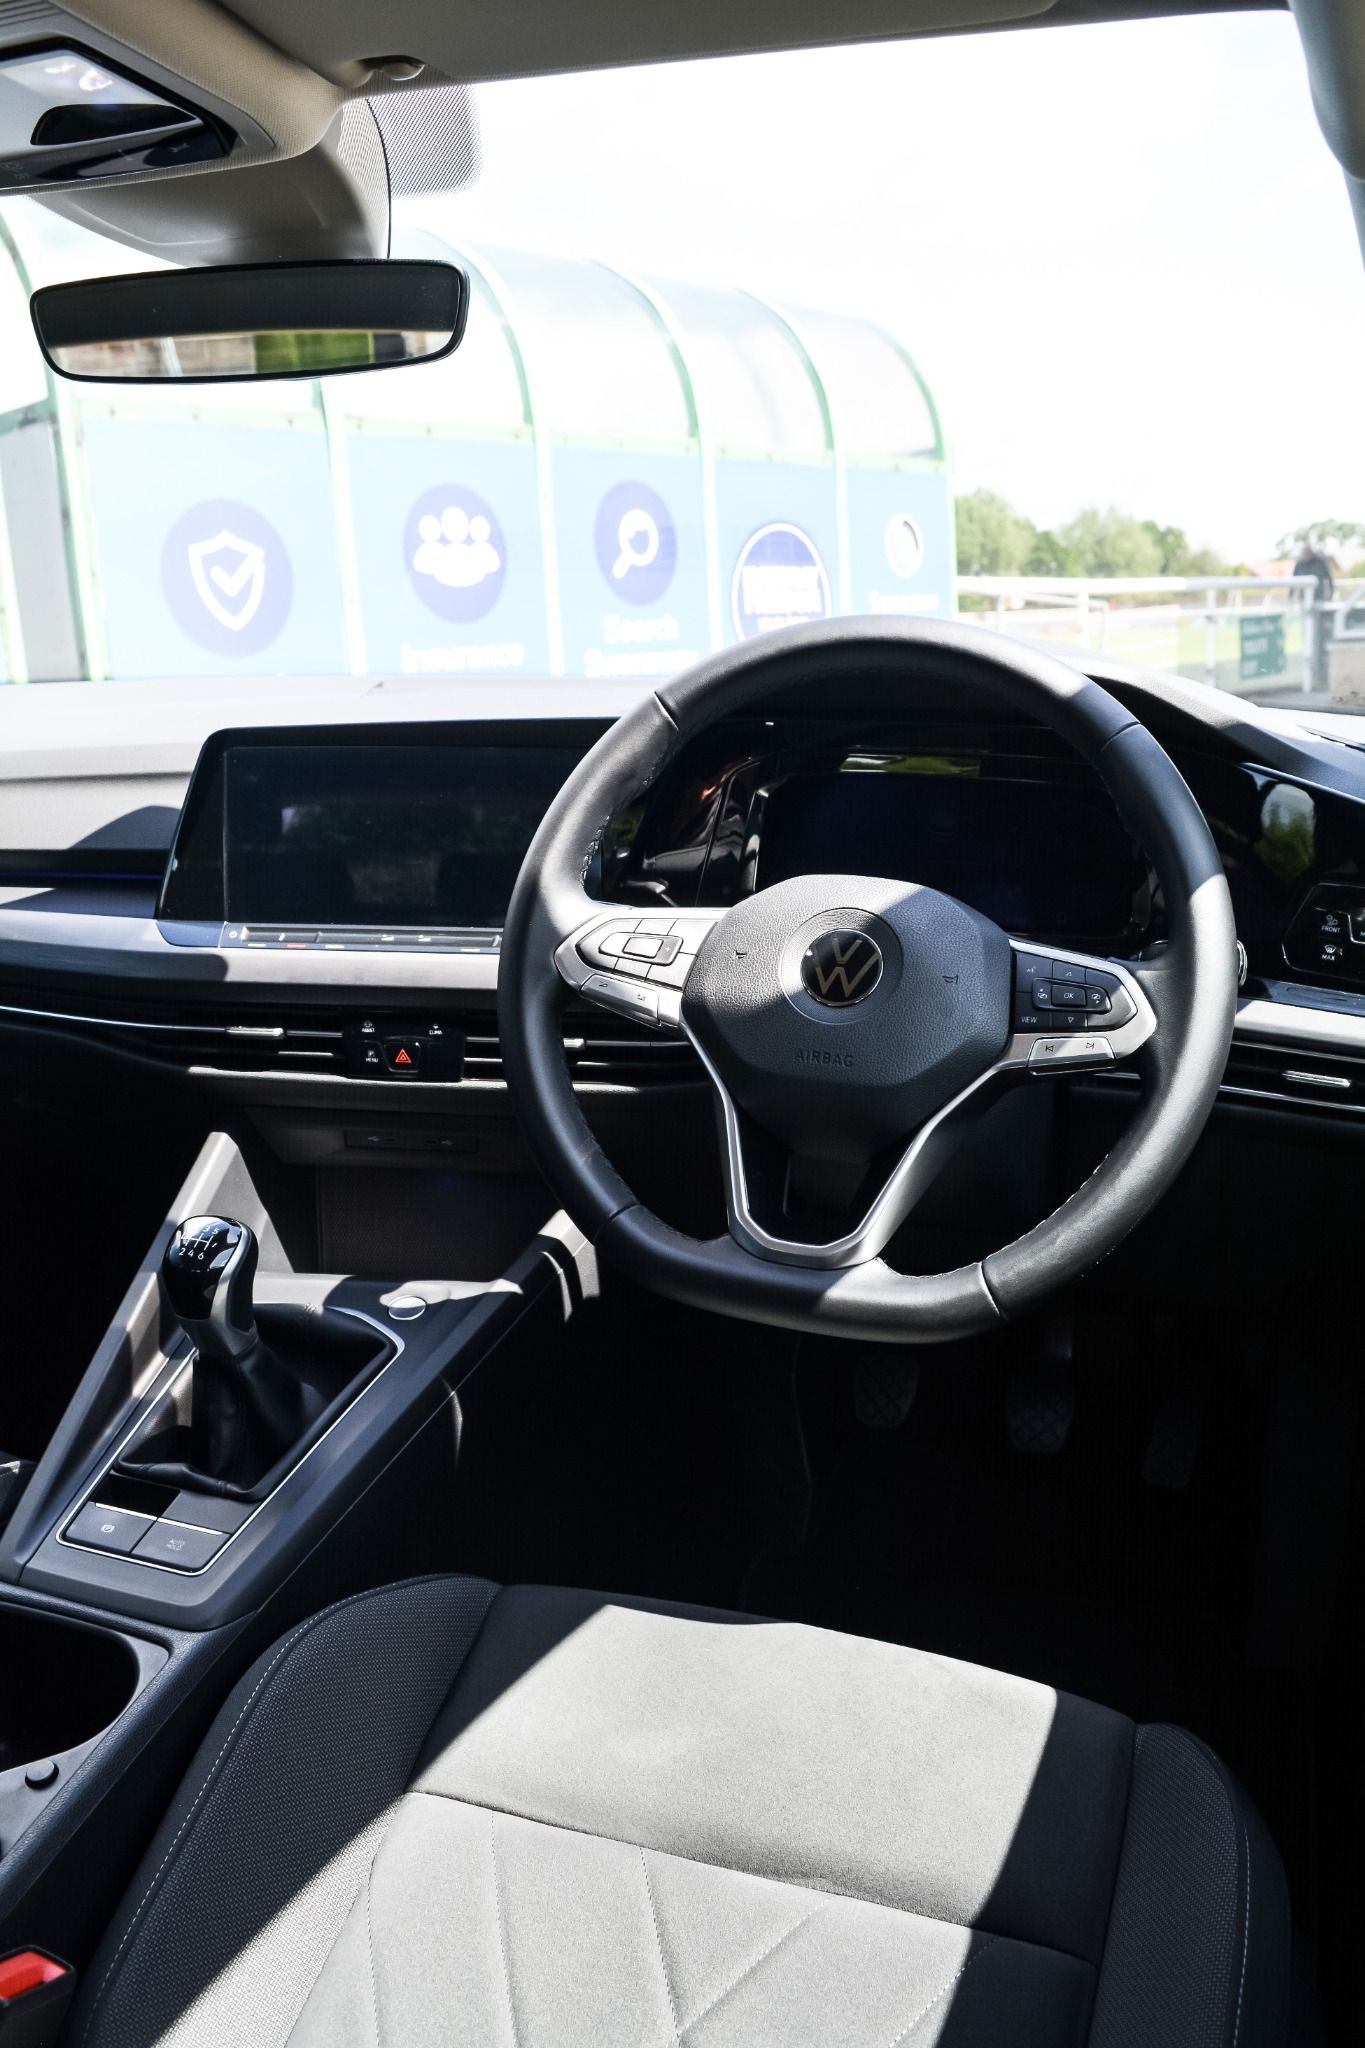 Interior view of Volkswagen Golf showing cloth seats, leather steering wheel, gear stick and infotainment system